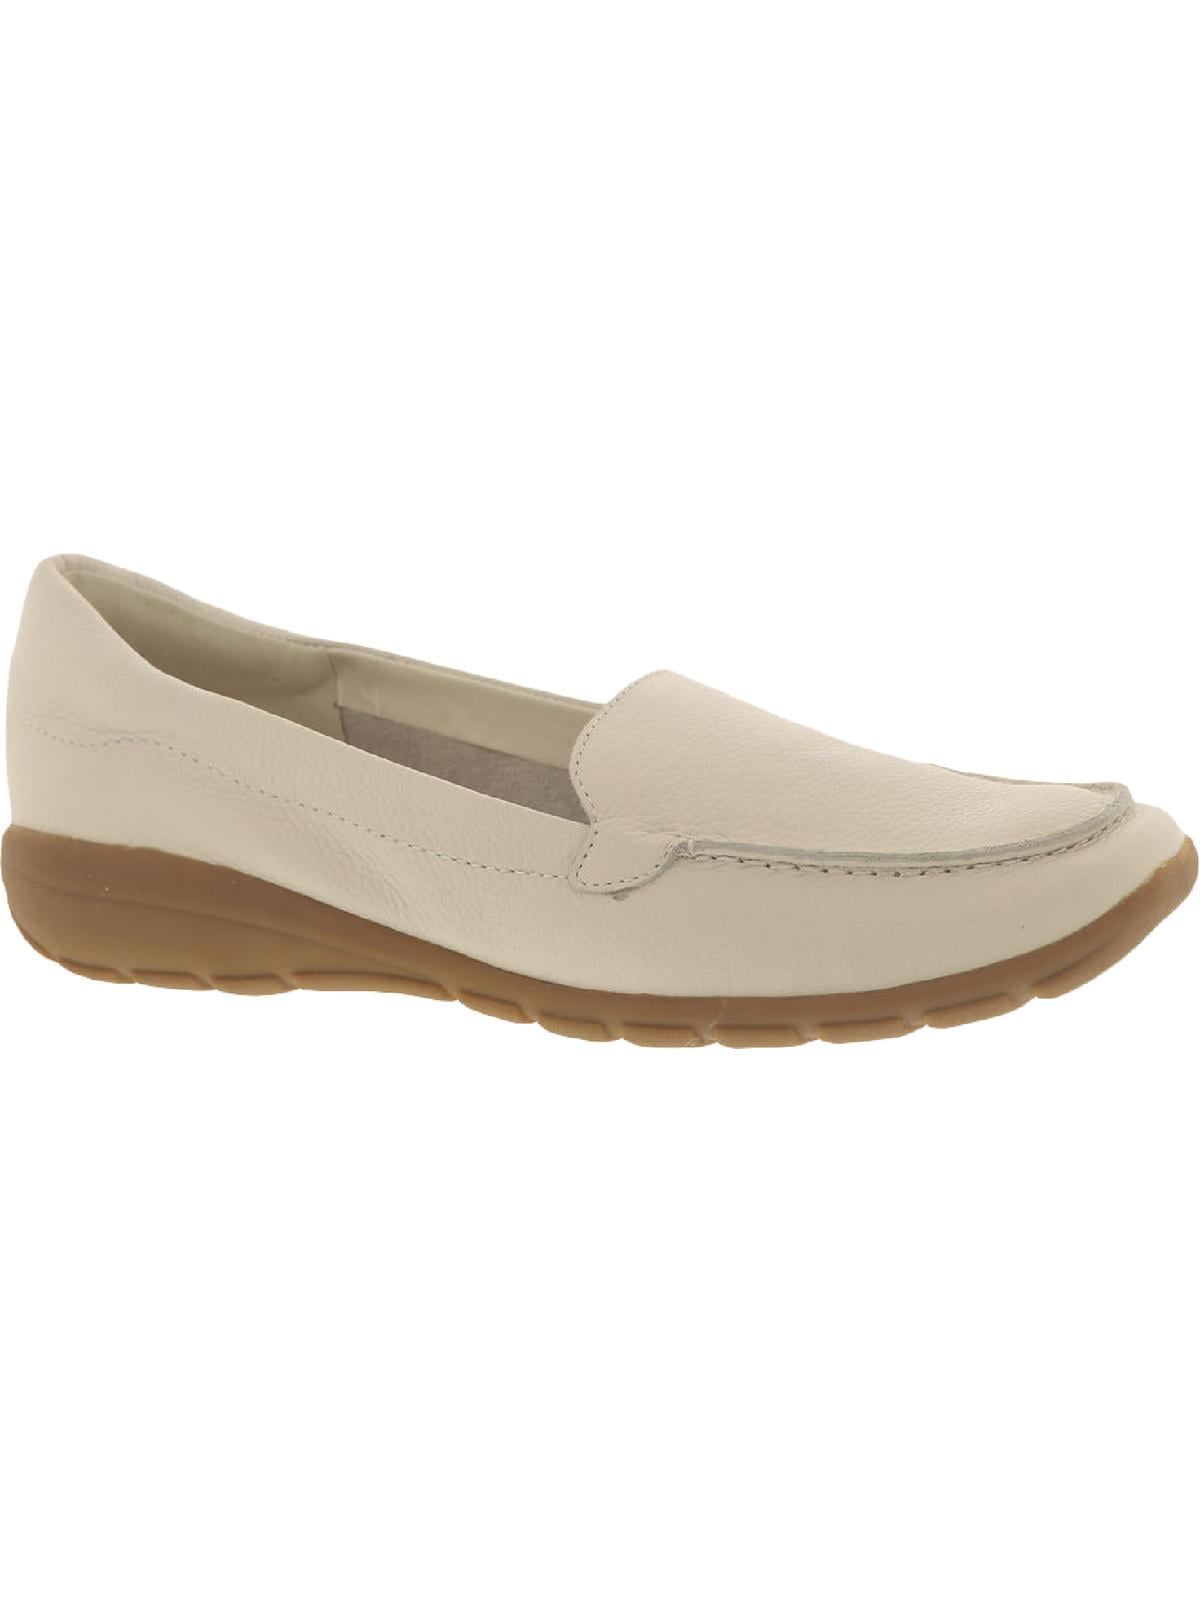 Easy Spirit Womens Abide 8 Leather Slip On Comfort Loafers Shoes BHFO 0551